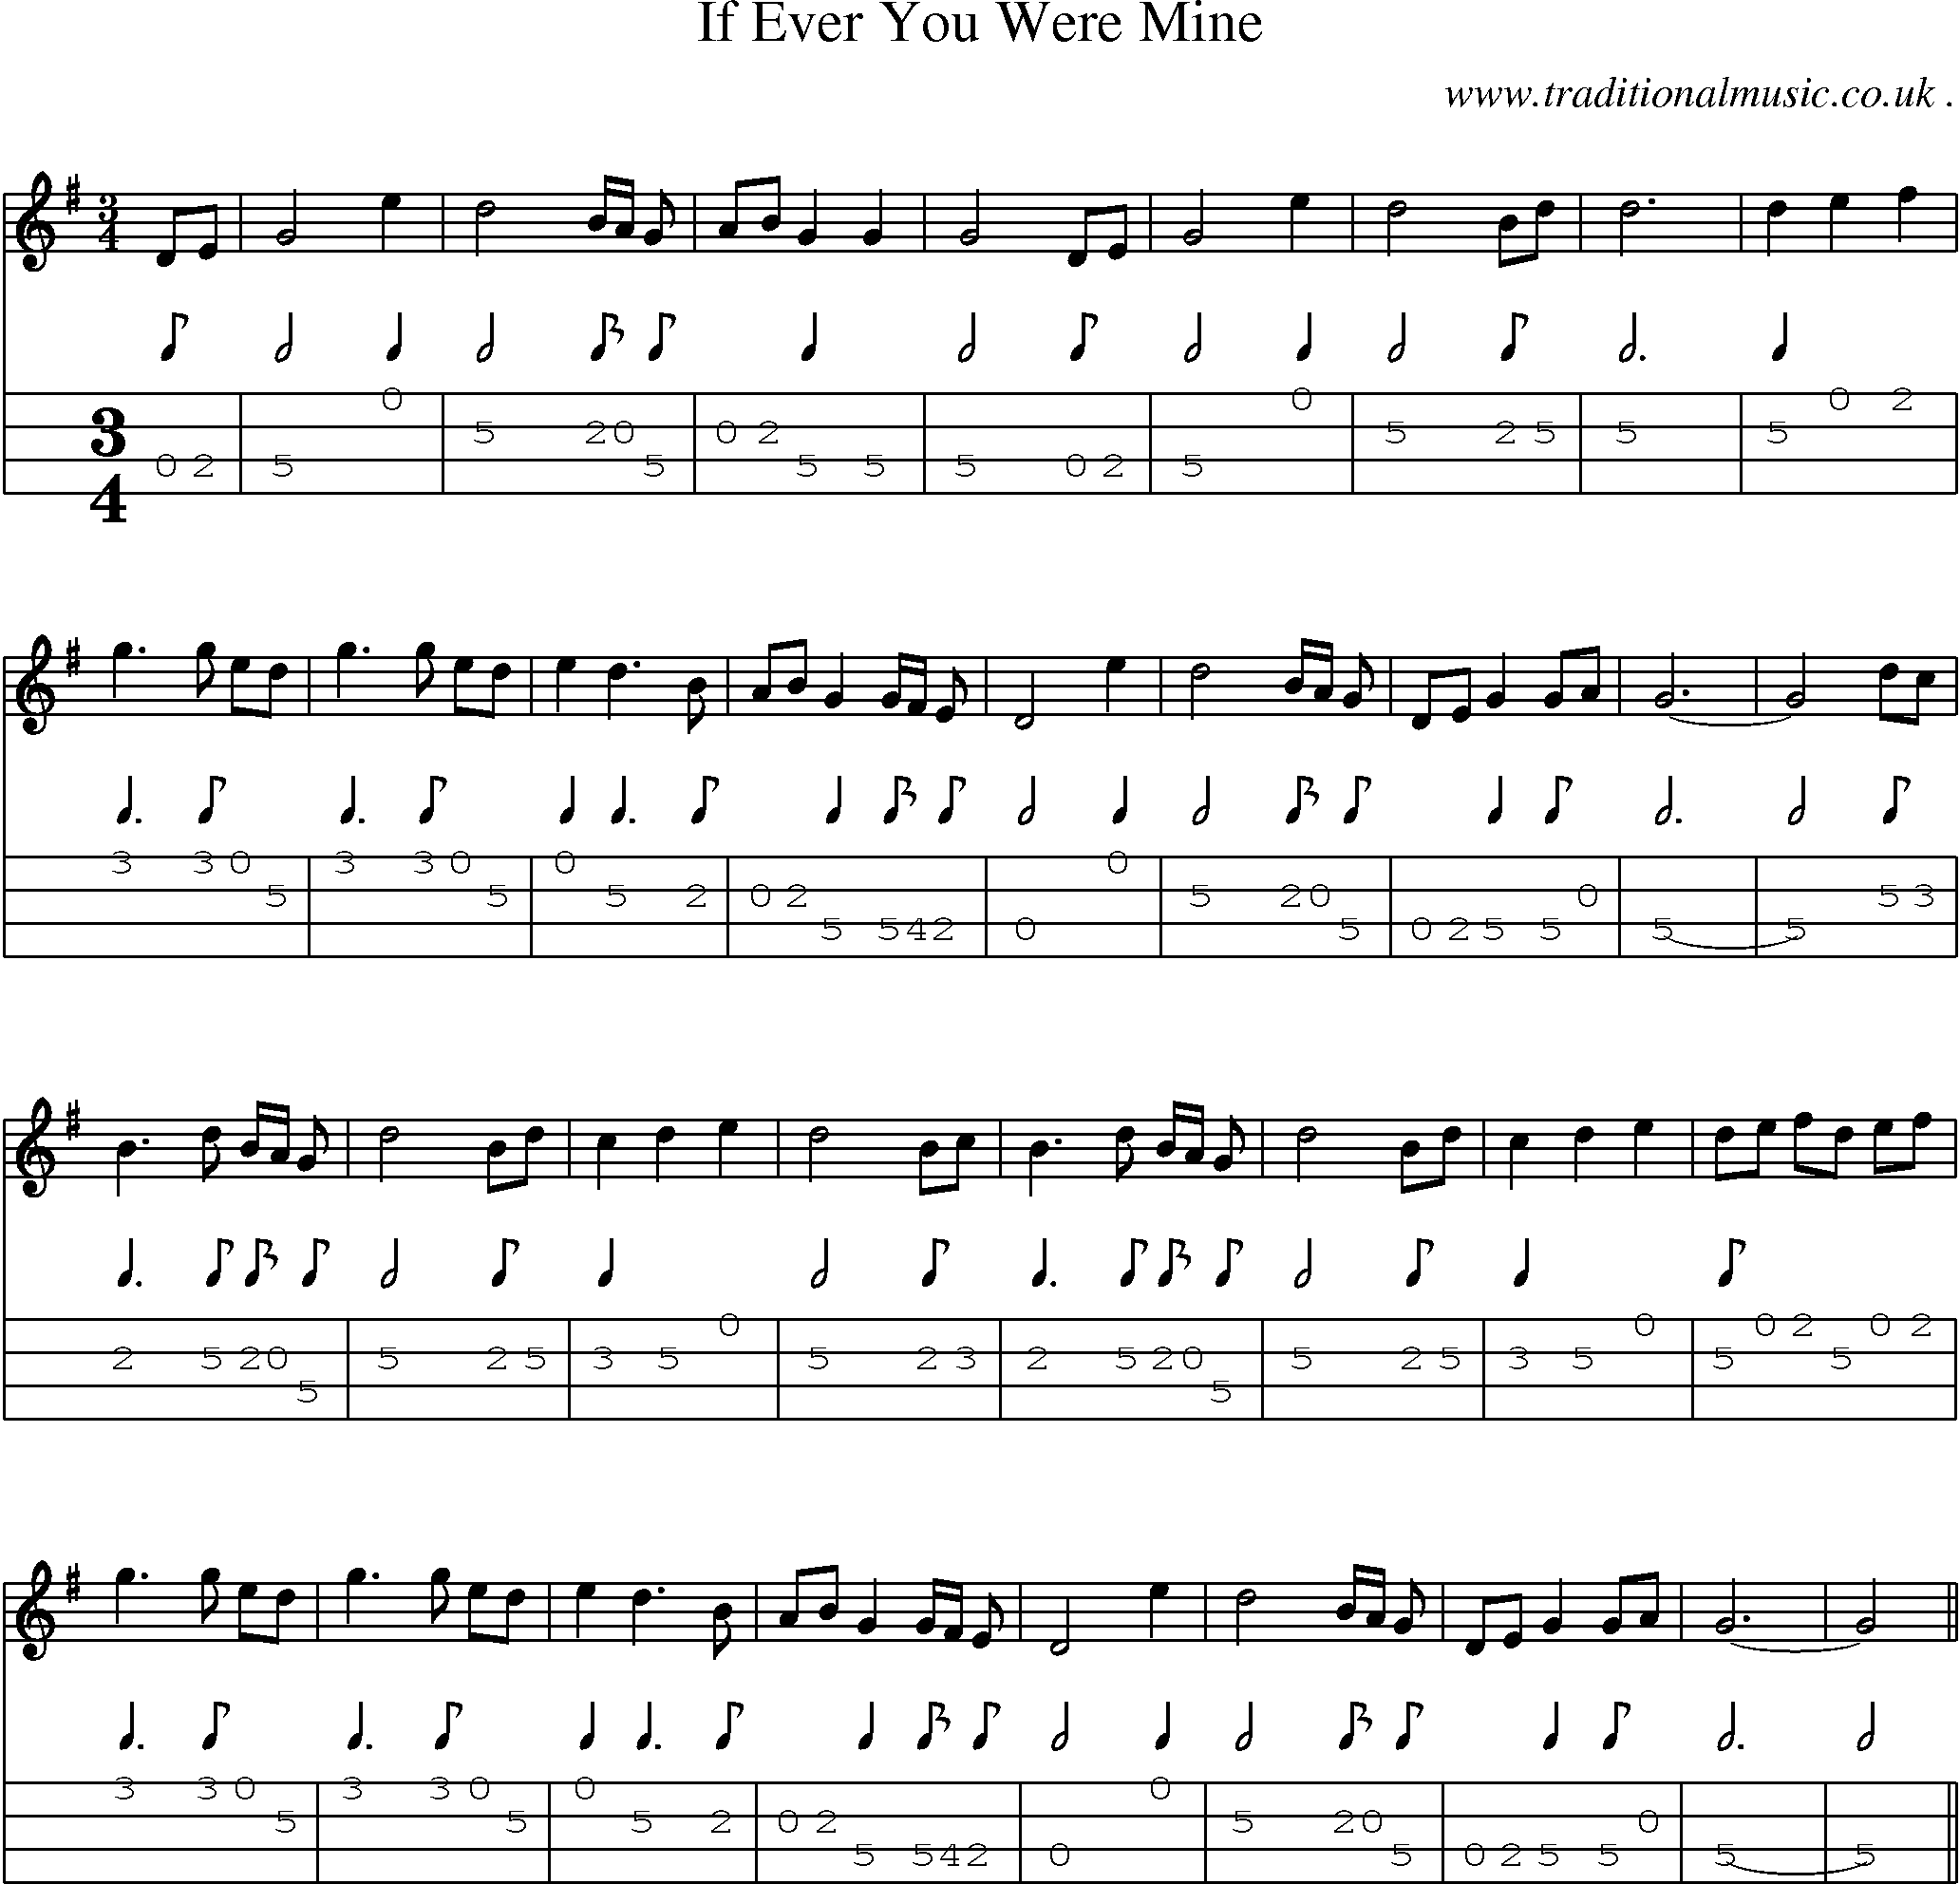 Sheet-music  score, Chords and Mandolin Tabs for If Ever You Were Mine